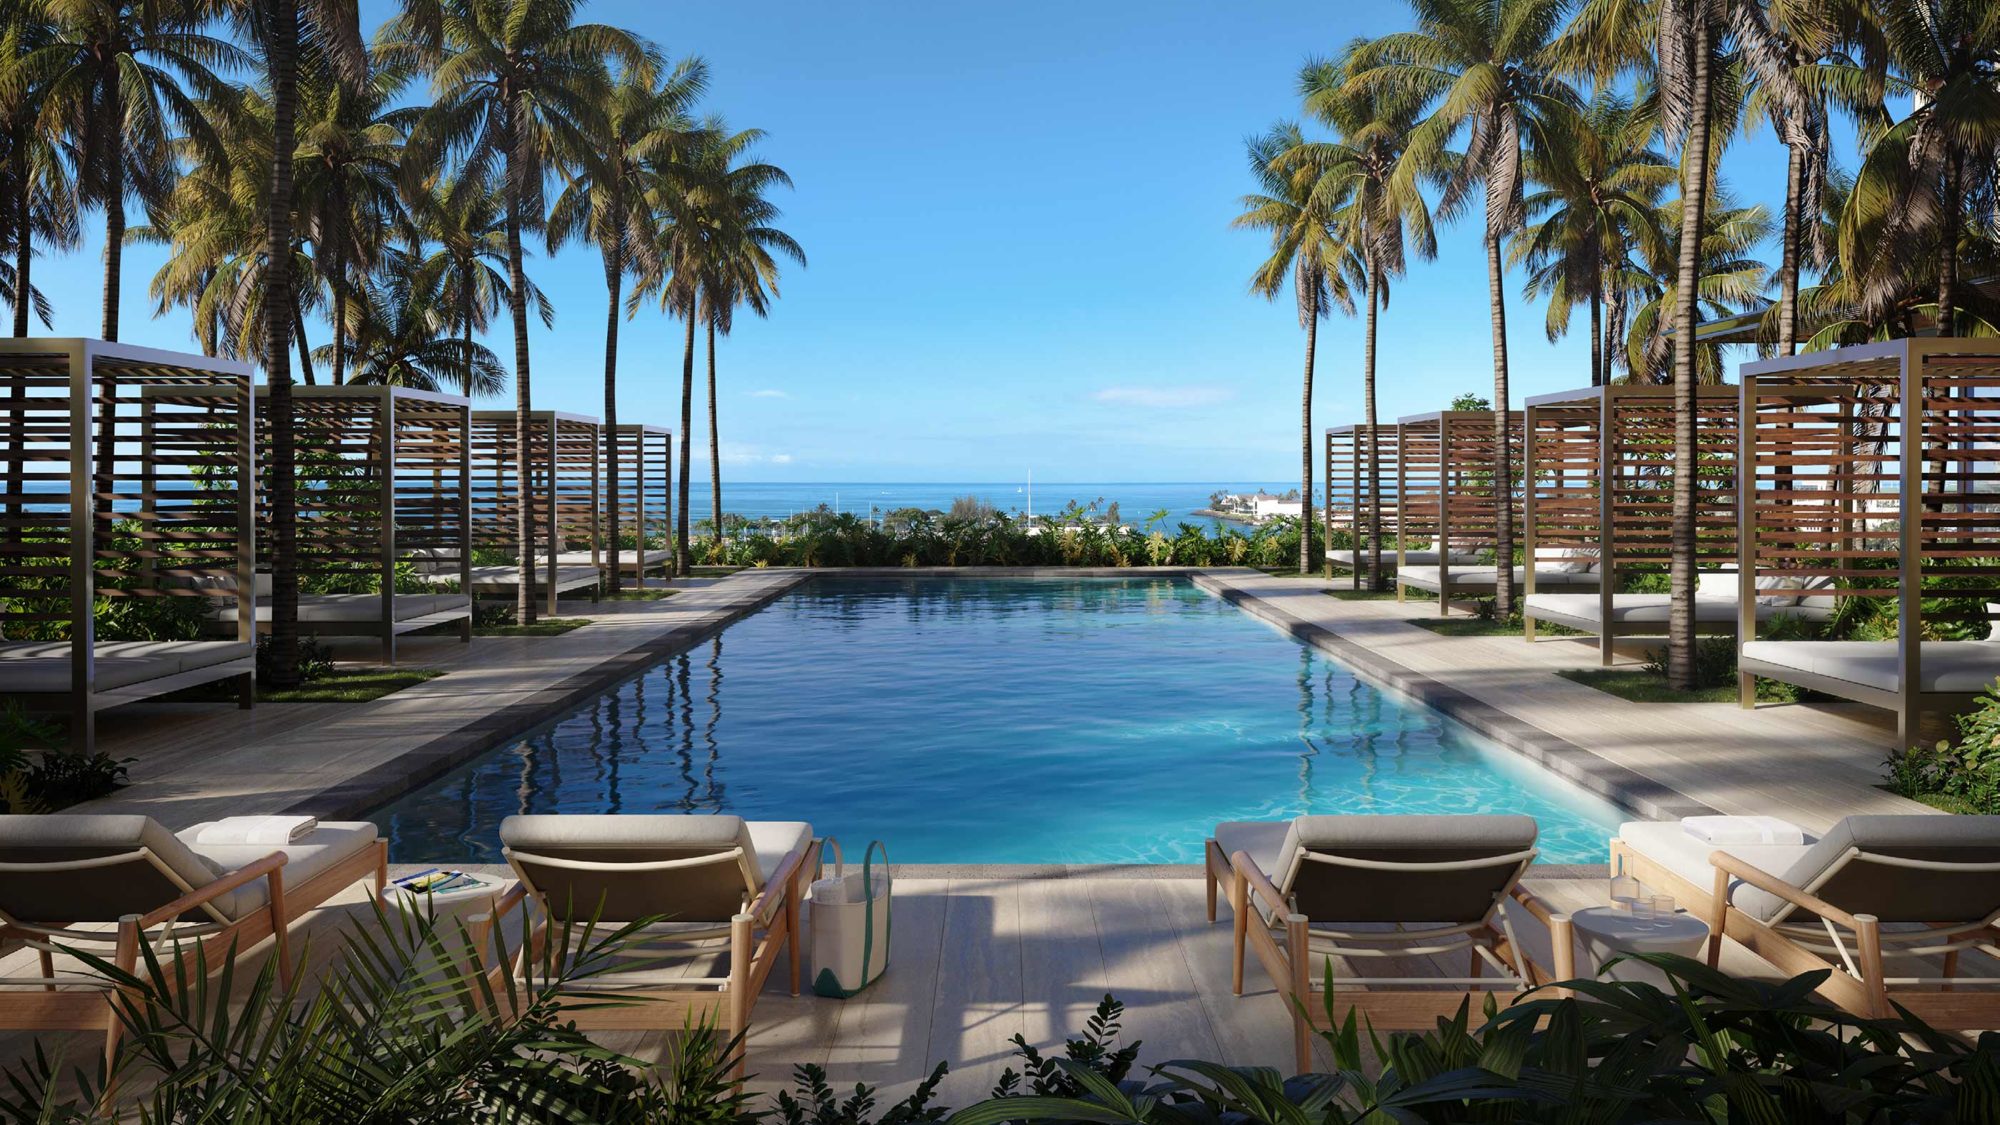 Sunrise Lap Pool surrounded by cabana lounges and palm trees